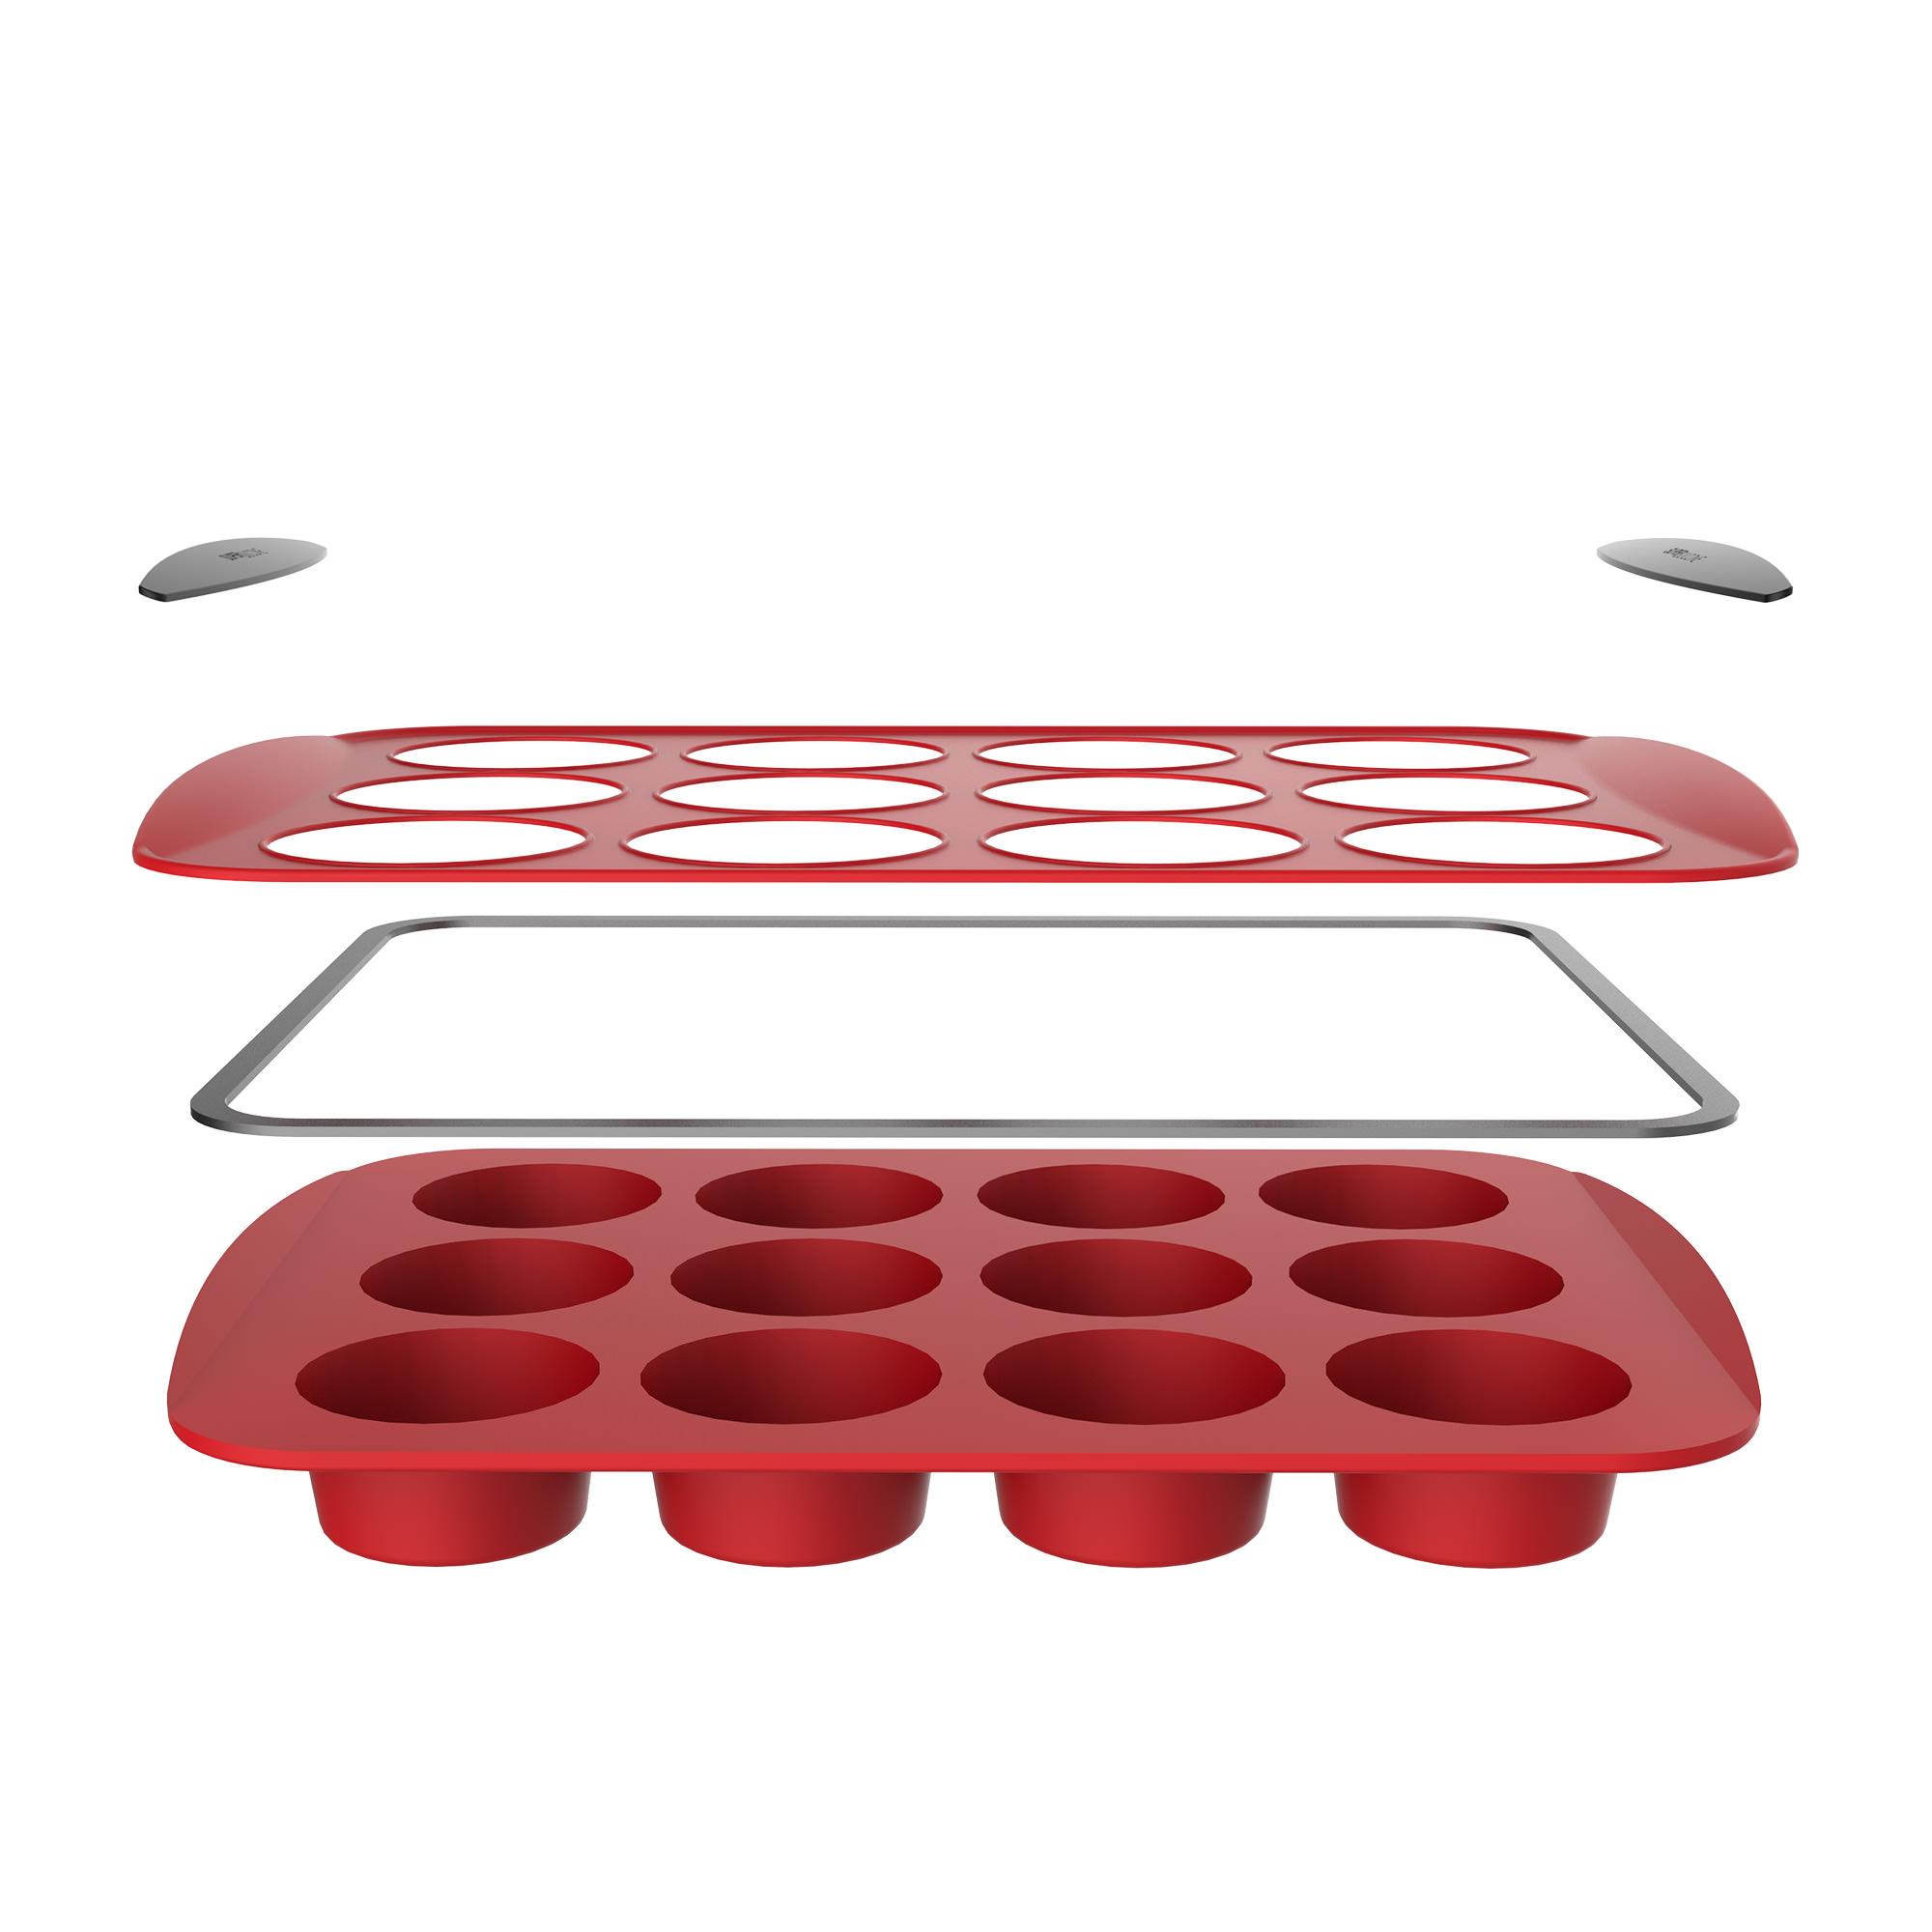 Daily Bake Silicone Muffin Pan 12 Cup Red Image 3